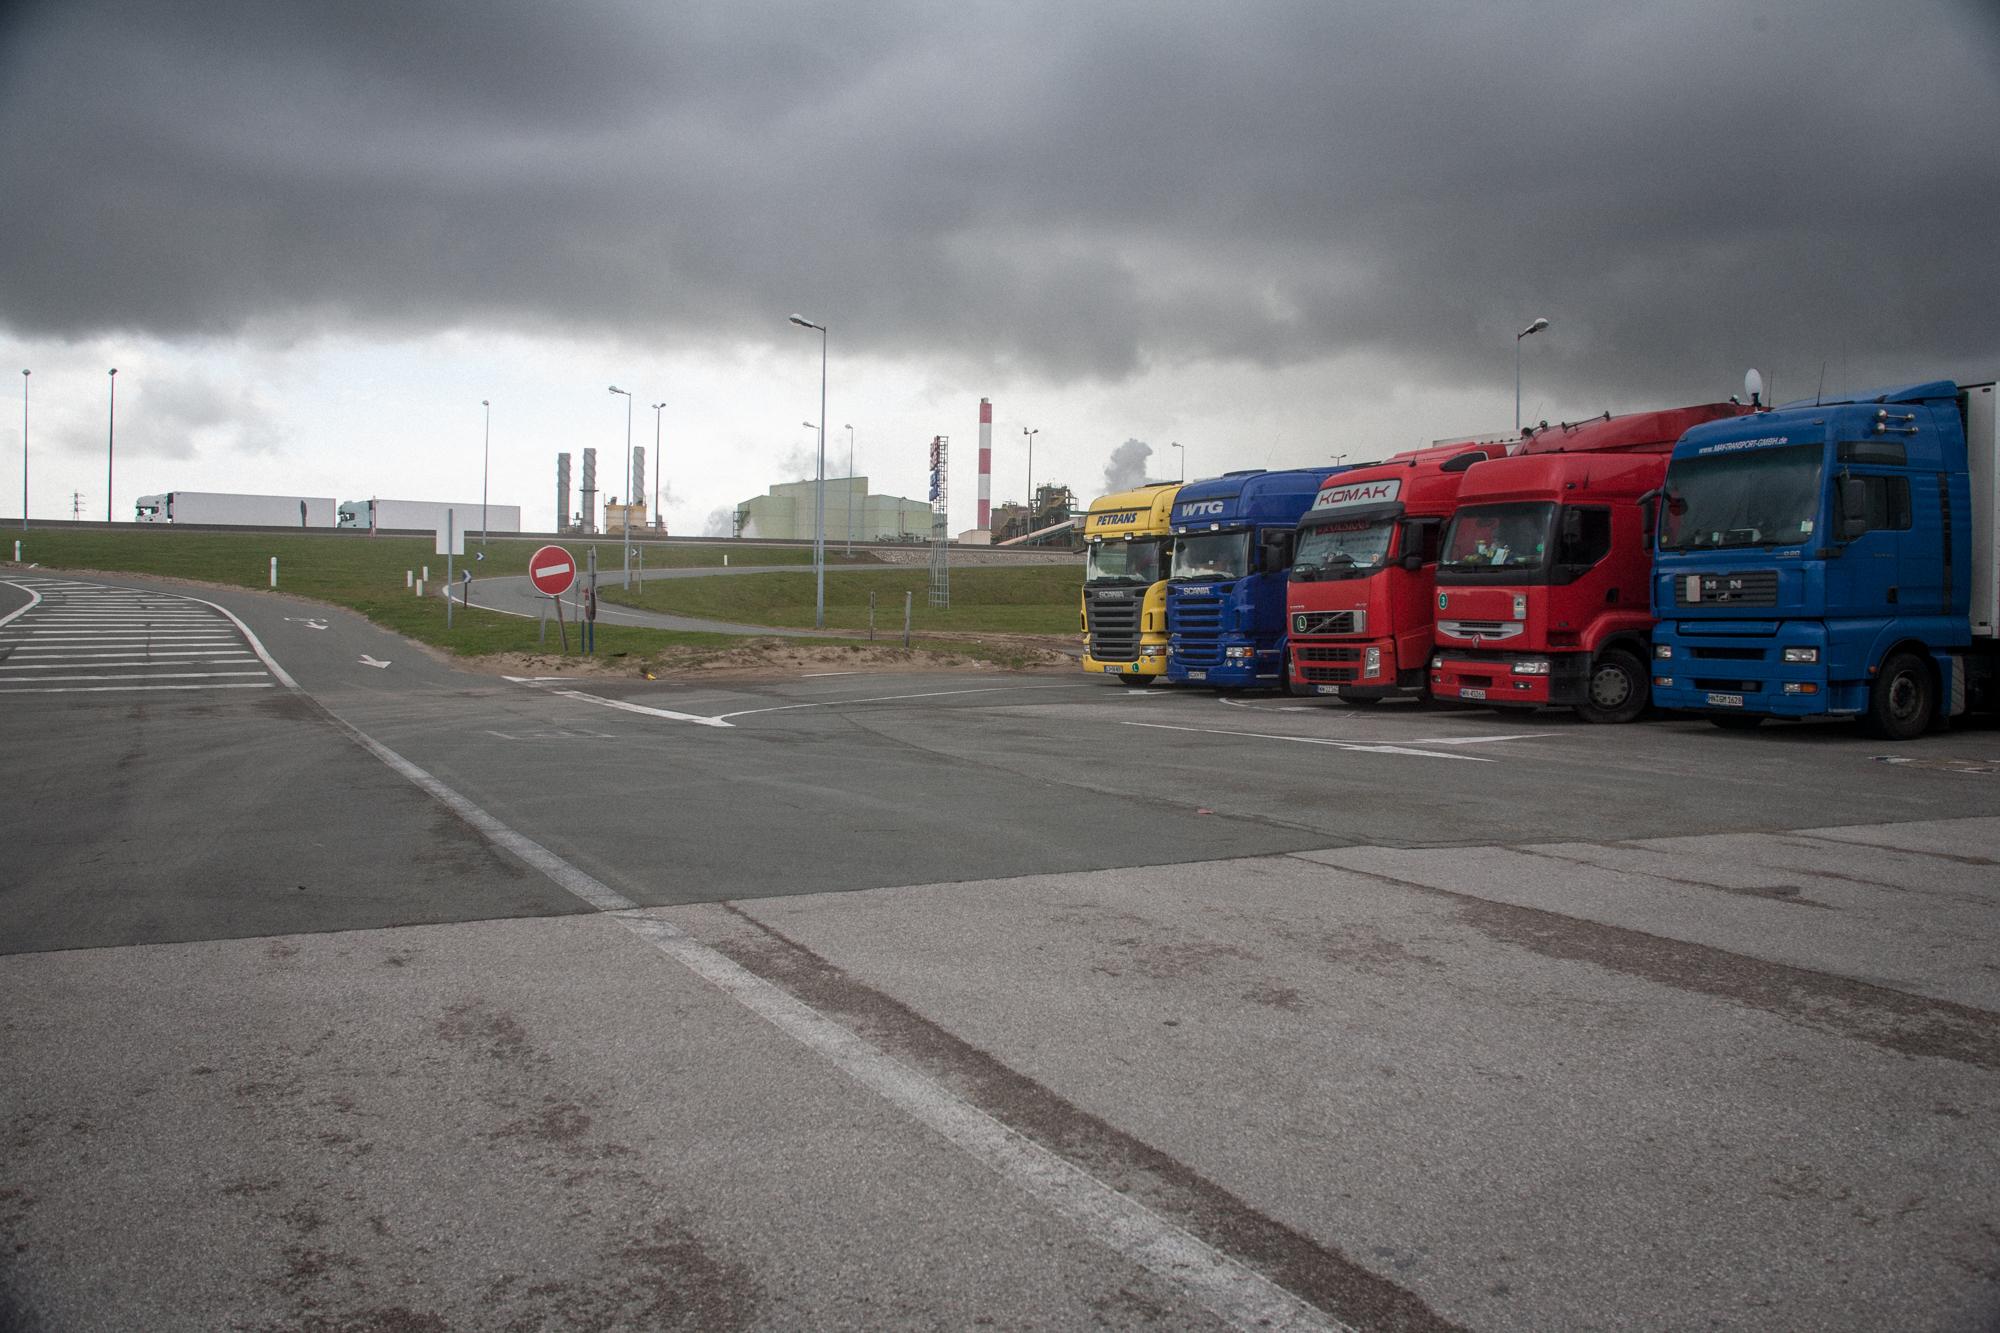 Migrants in Calais, France (2008) - Trucks parked just opposite "The Jungle"...